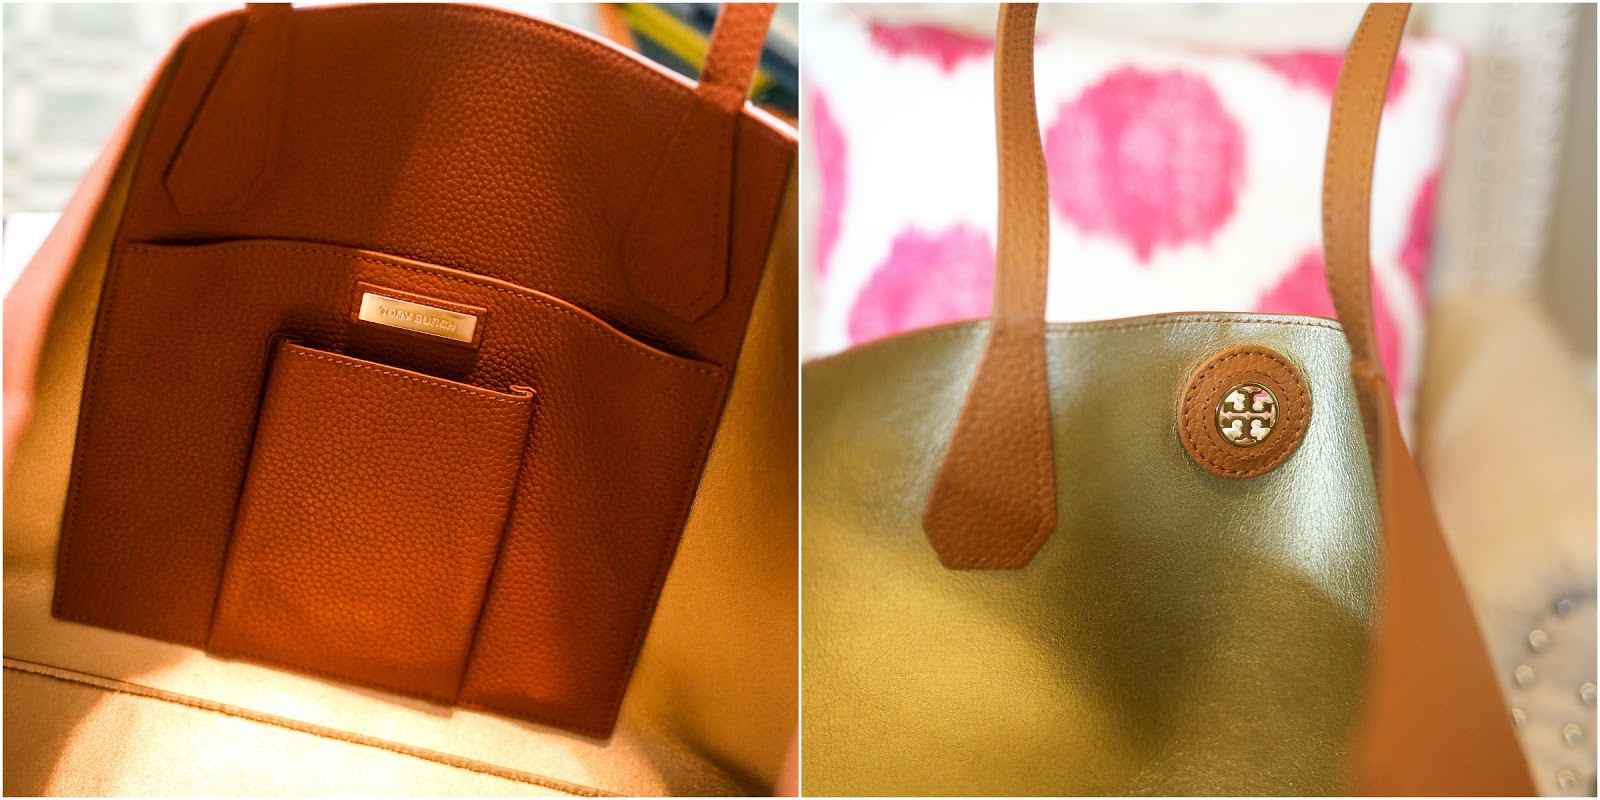 Tory Burch Perry Tote Review - Sizing, Wear & Tear - whatveewore